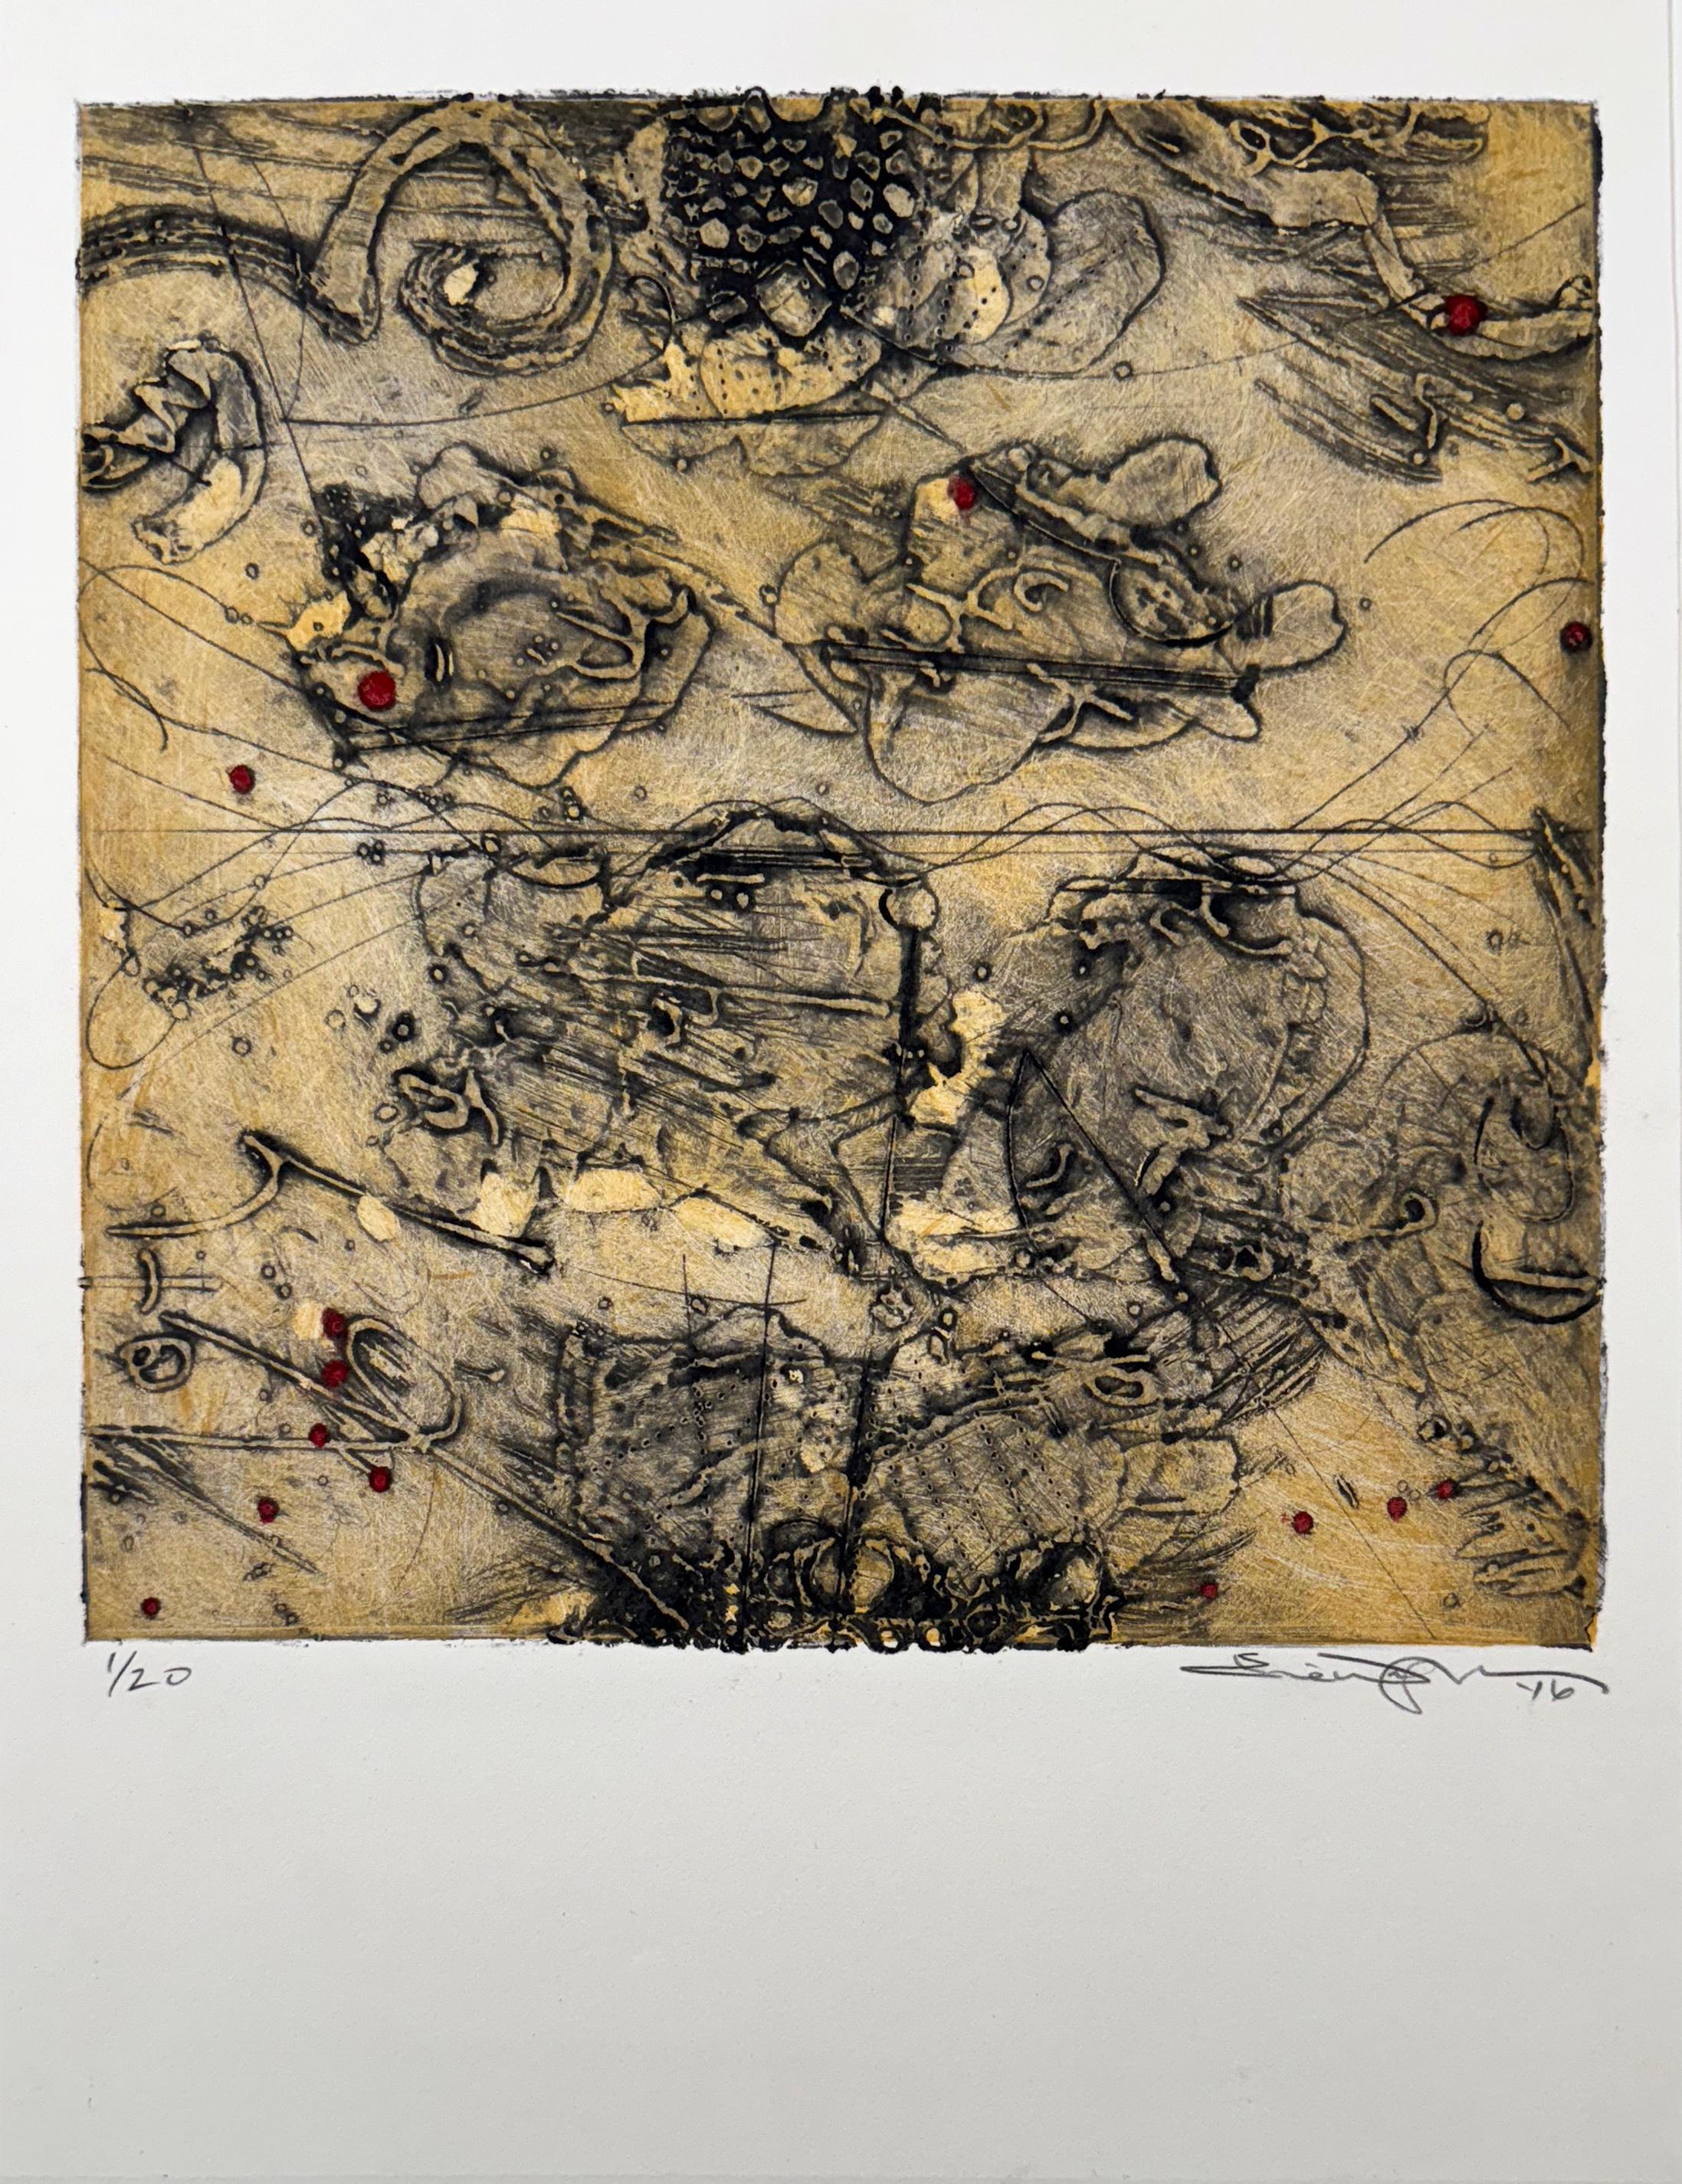 Signed and numbered from an edition of 20.

Elise Wagner painter, printmaker, and teacher, is a recent recipient of the Pollock Krasner Foundation Grant. Originally from Jersey City, New Jersey, Elise relocated to Portland, Oregon over 30 years ago.